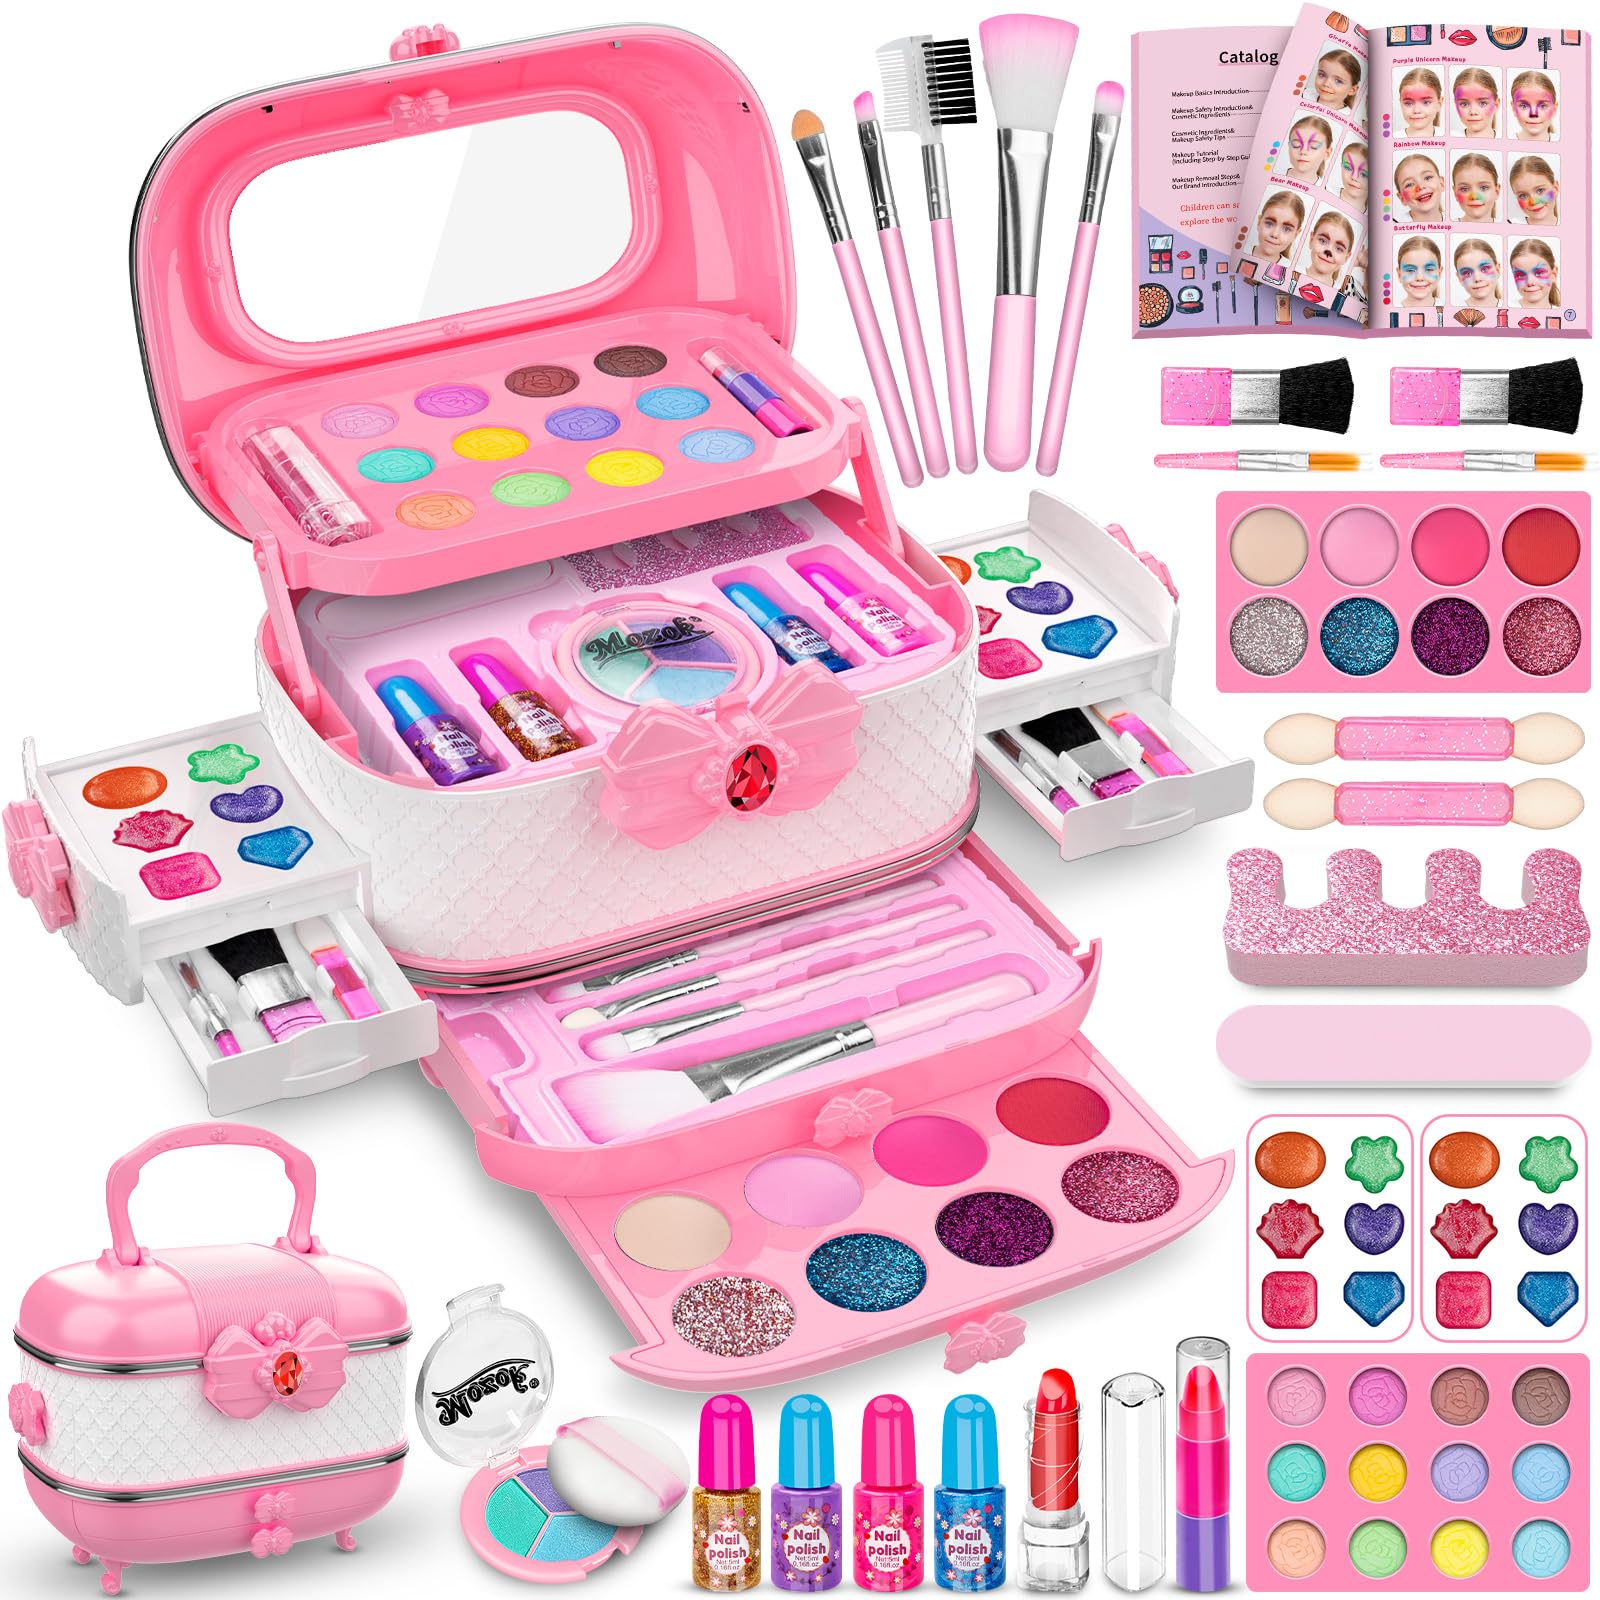 Mozok Kids Makeup Kit for Girl, Washable Makeup Girl Toys with Cosmetic  Case, Play Real Princess Make Up Beauty Set Toys for 3 4 5 6 7 8 9 10 11 12